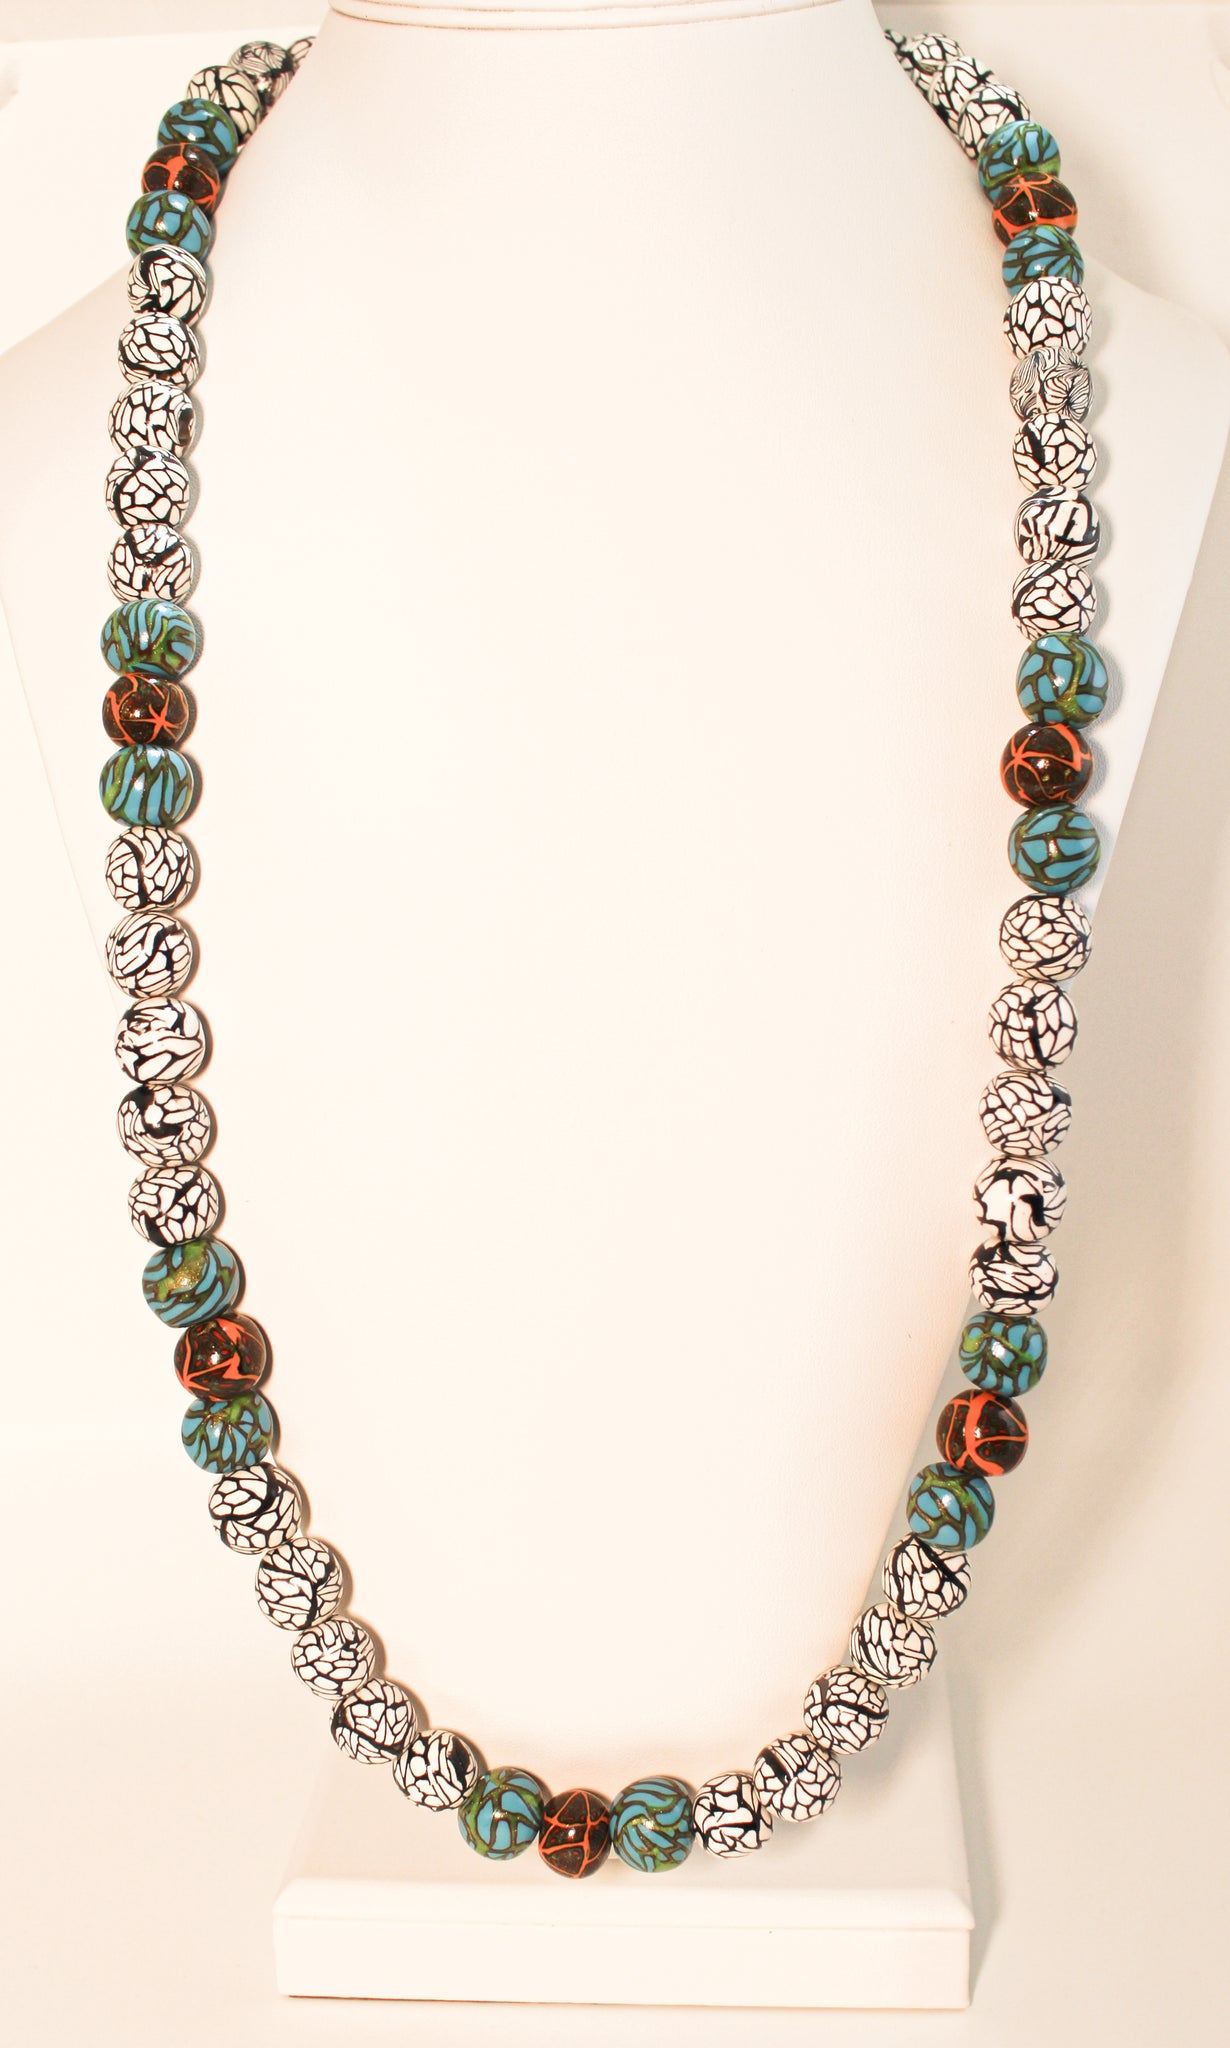 KD-SS005 The "Bliss" Vibrant Hand-Rolled 32 Inch, Gender Neutral Necklace